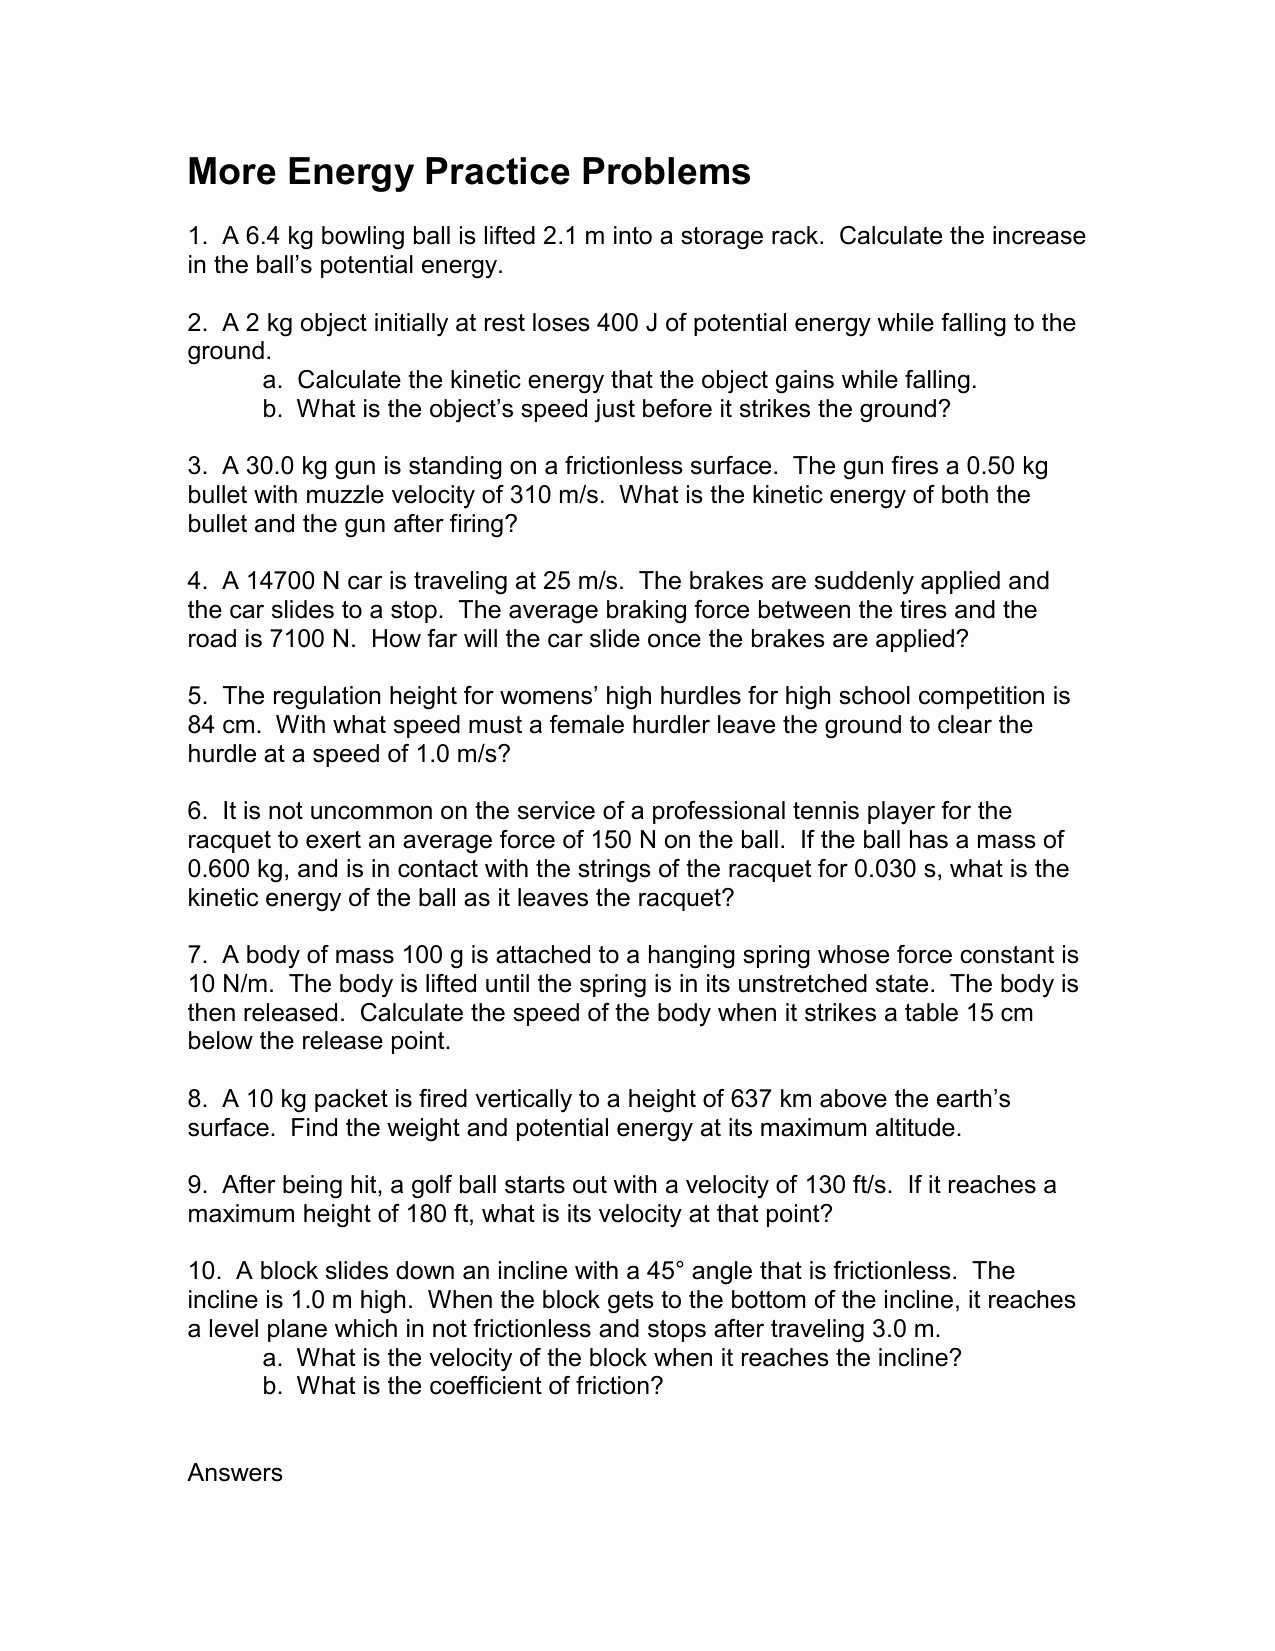 Potential Energy Worksheet Answers Along with Kinetic and Potential Energy Calculations Worksheet Image